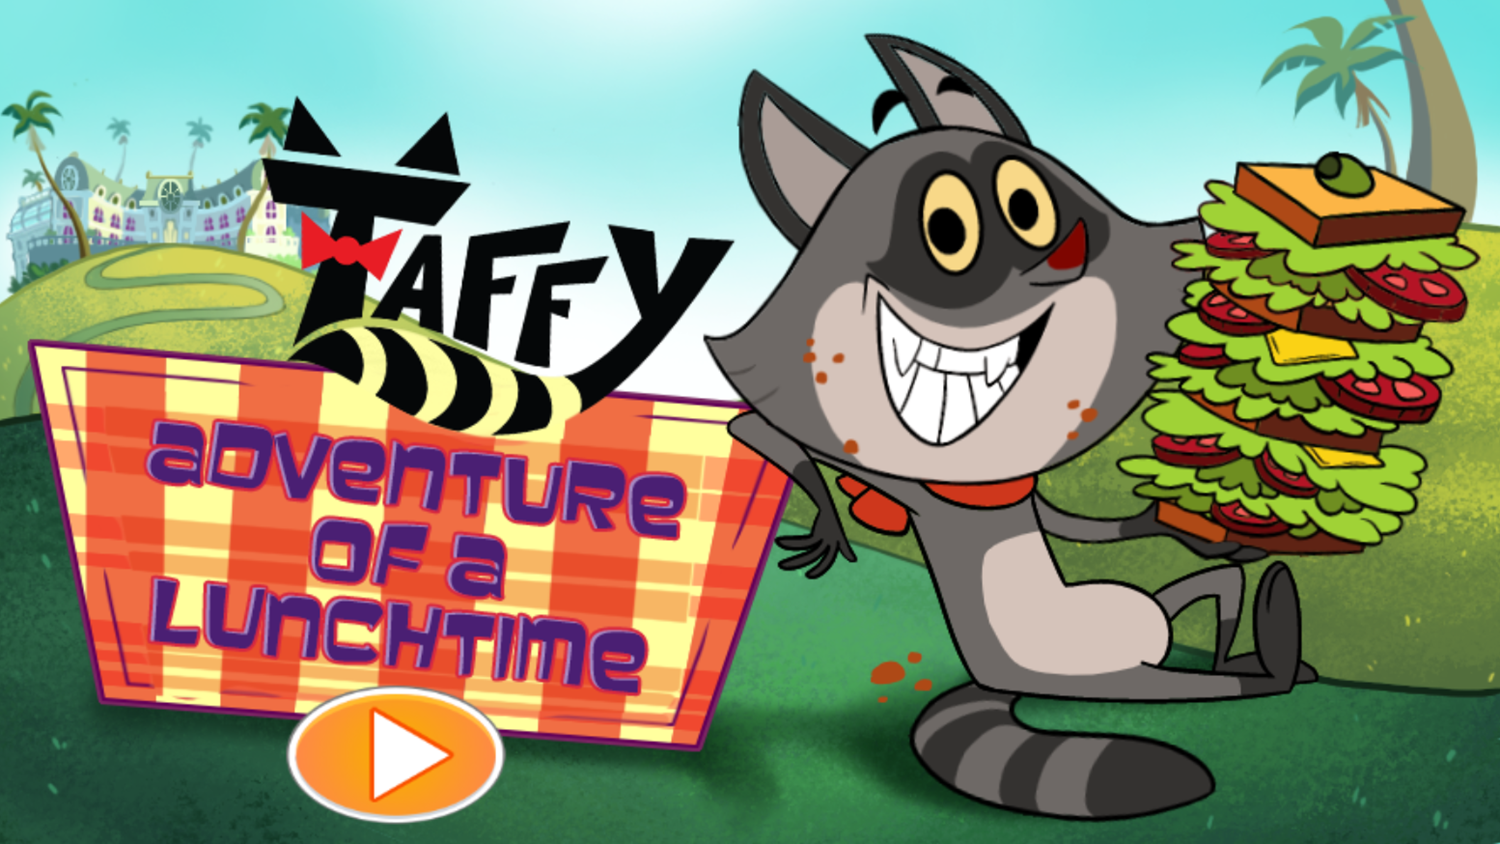 Taffy Adventure of a Lunchtime Game Welcome Screen Screenshot.